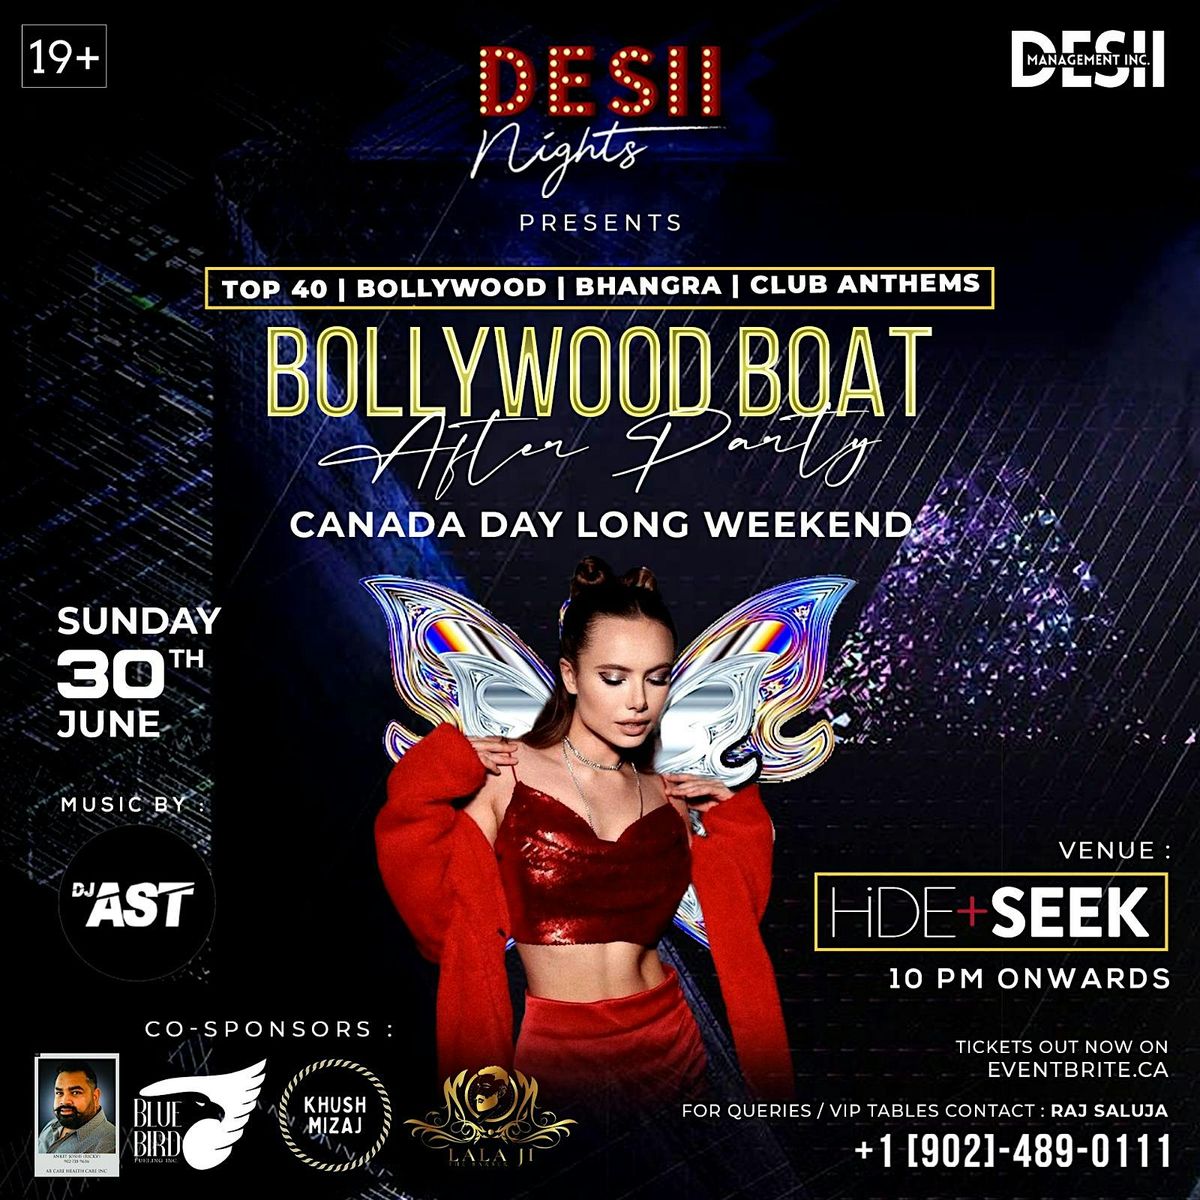 BOLLYWOOD BOAT AFTER-PARTY| DJ AST | HIDE+SEEK | 30TH JUNE| CANADA DAY